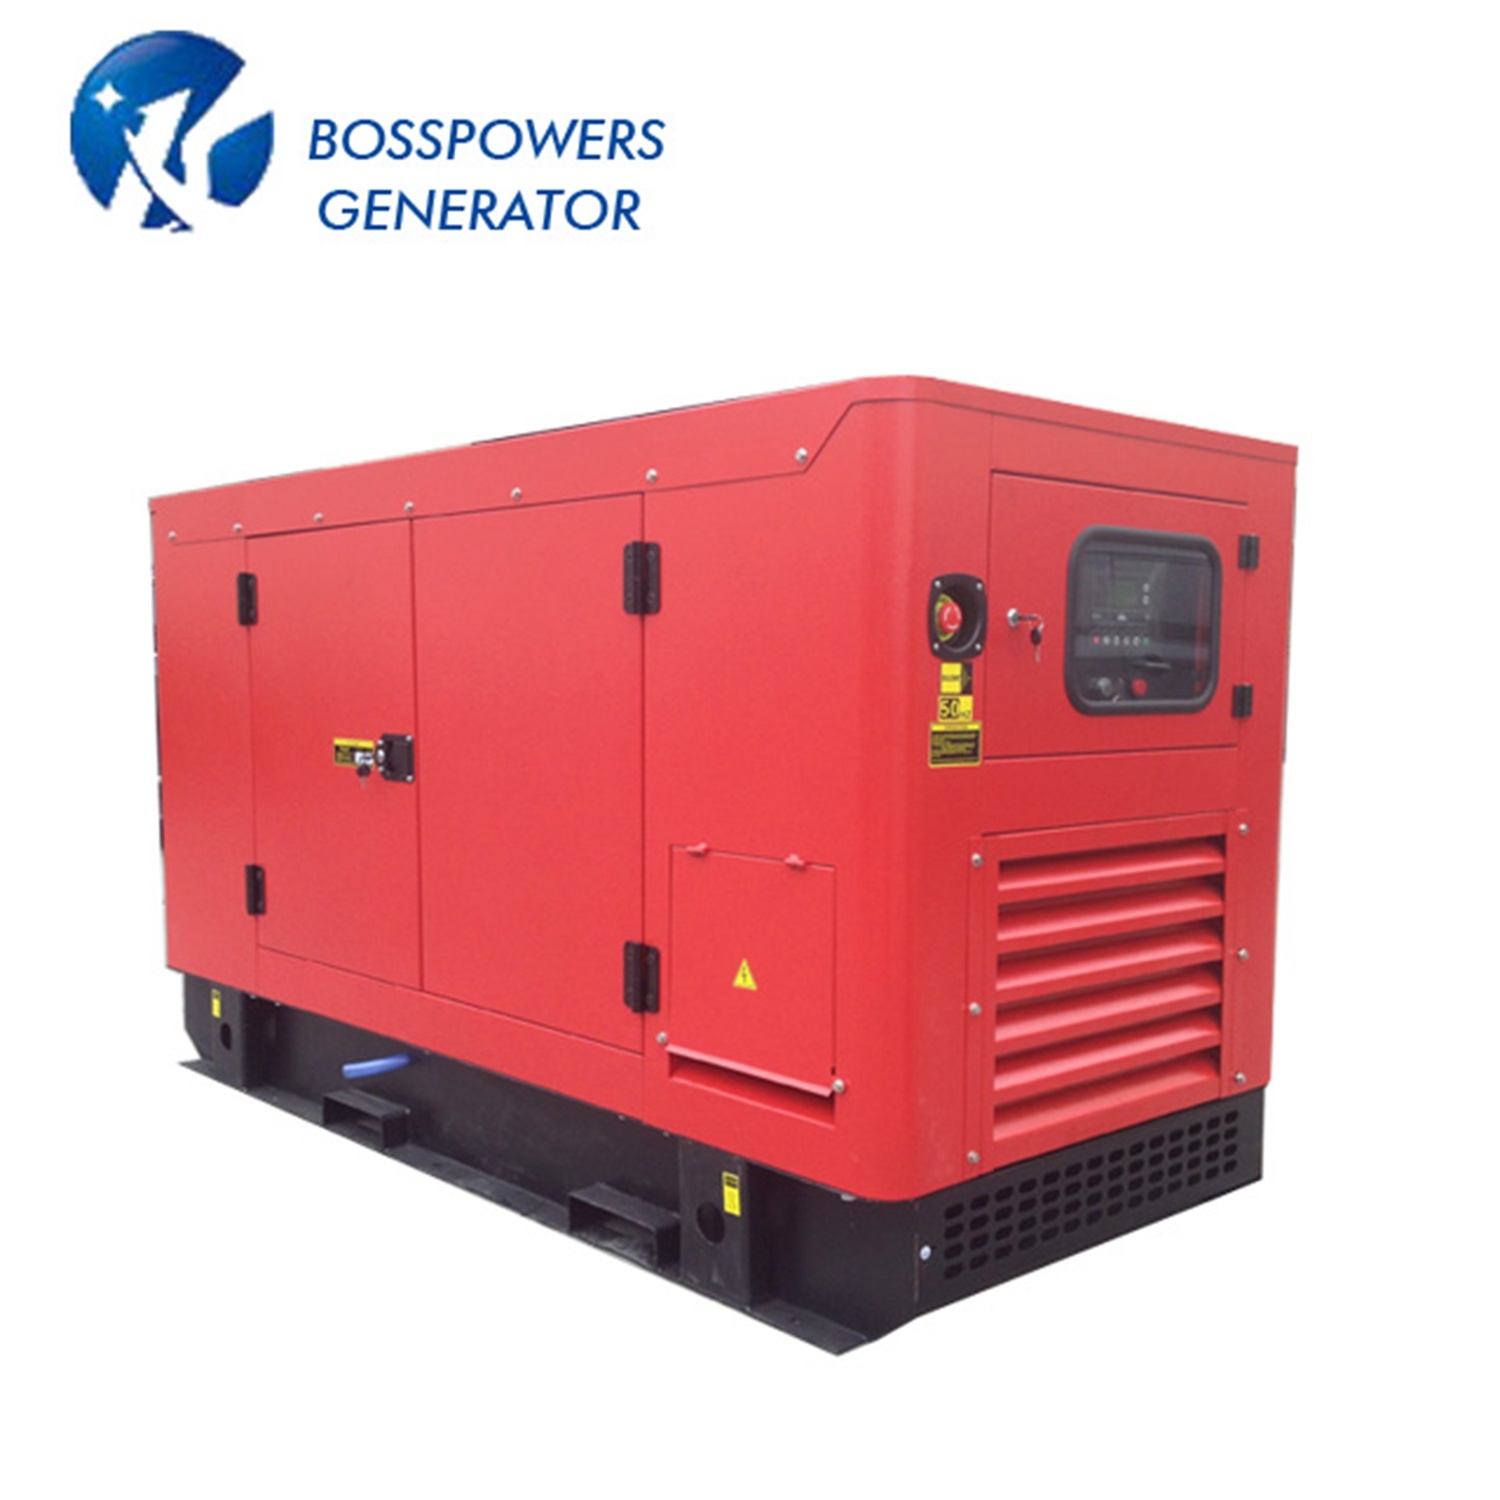 220kw Soundproof Canopy Generator Powered by Bf6m1015c-La-G2a Deutz Engine